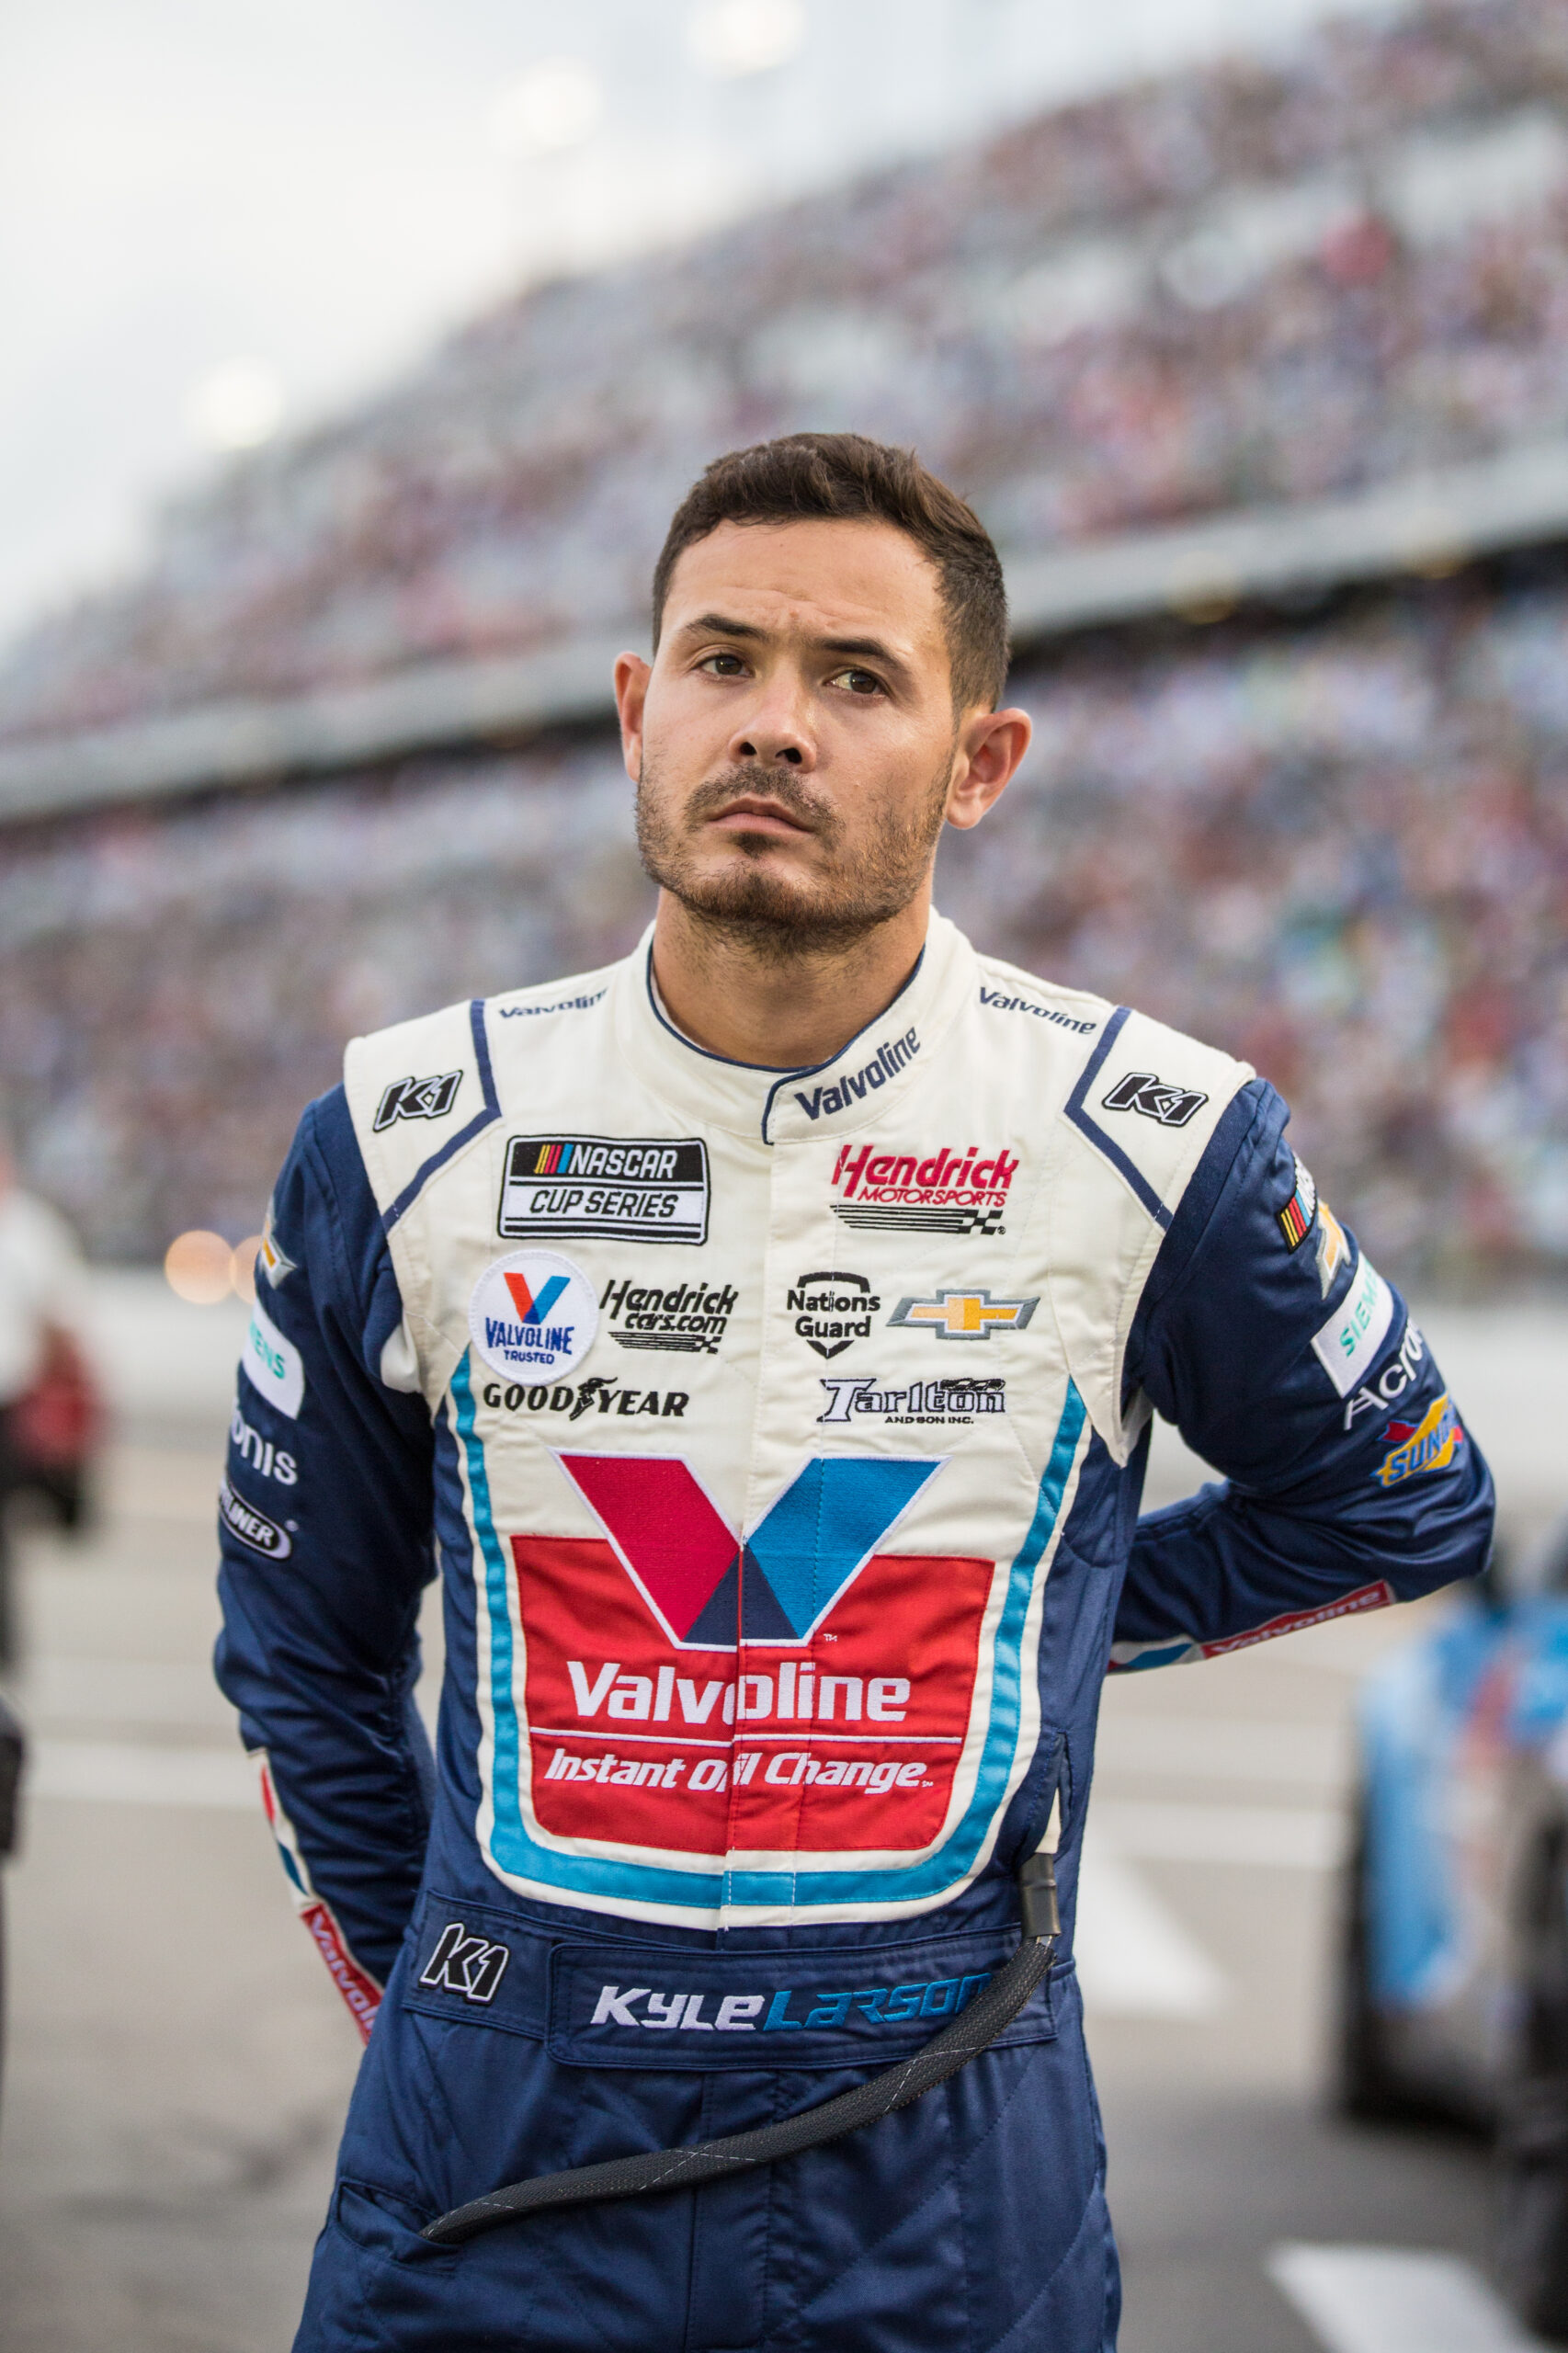 All things considered, Kyle Larson keeps turning up the wick with his performances. (Photo: Jonathan Huff | The Podium Finish)